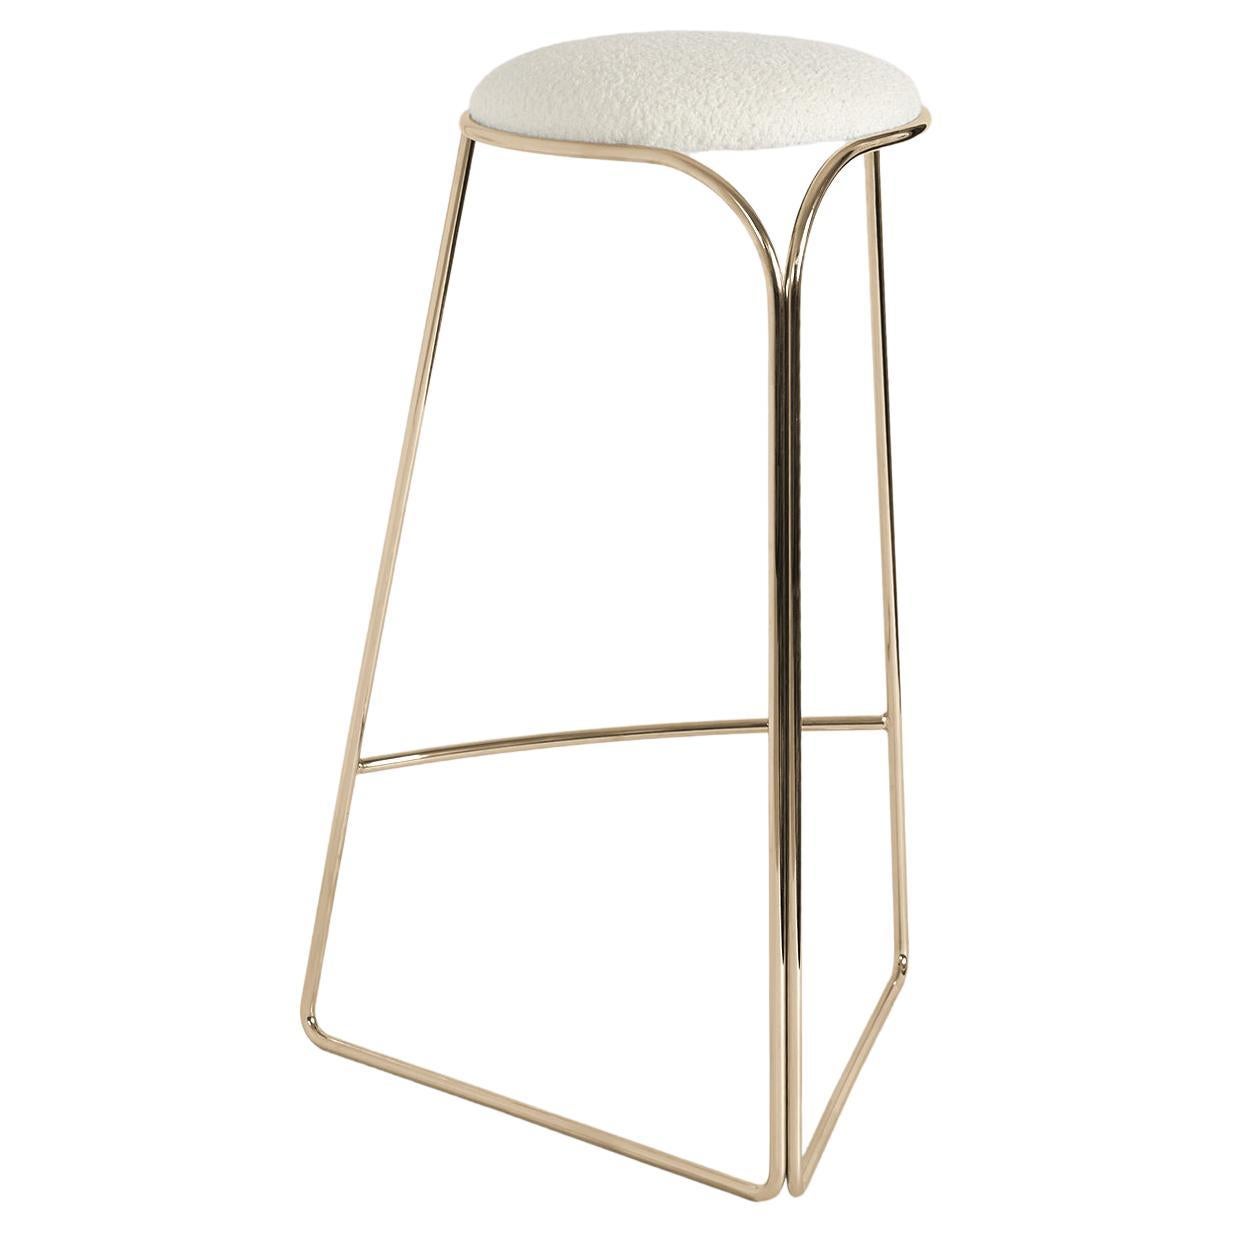 Flow Gold Contemporary High Stool by Enrico Girotti Made in Italy by lapiegaWD